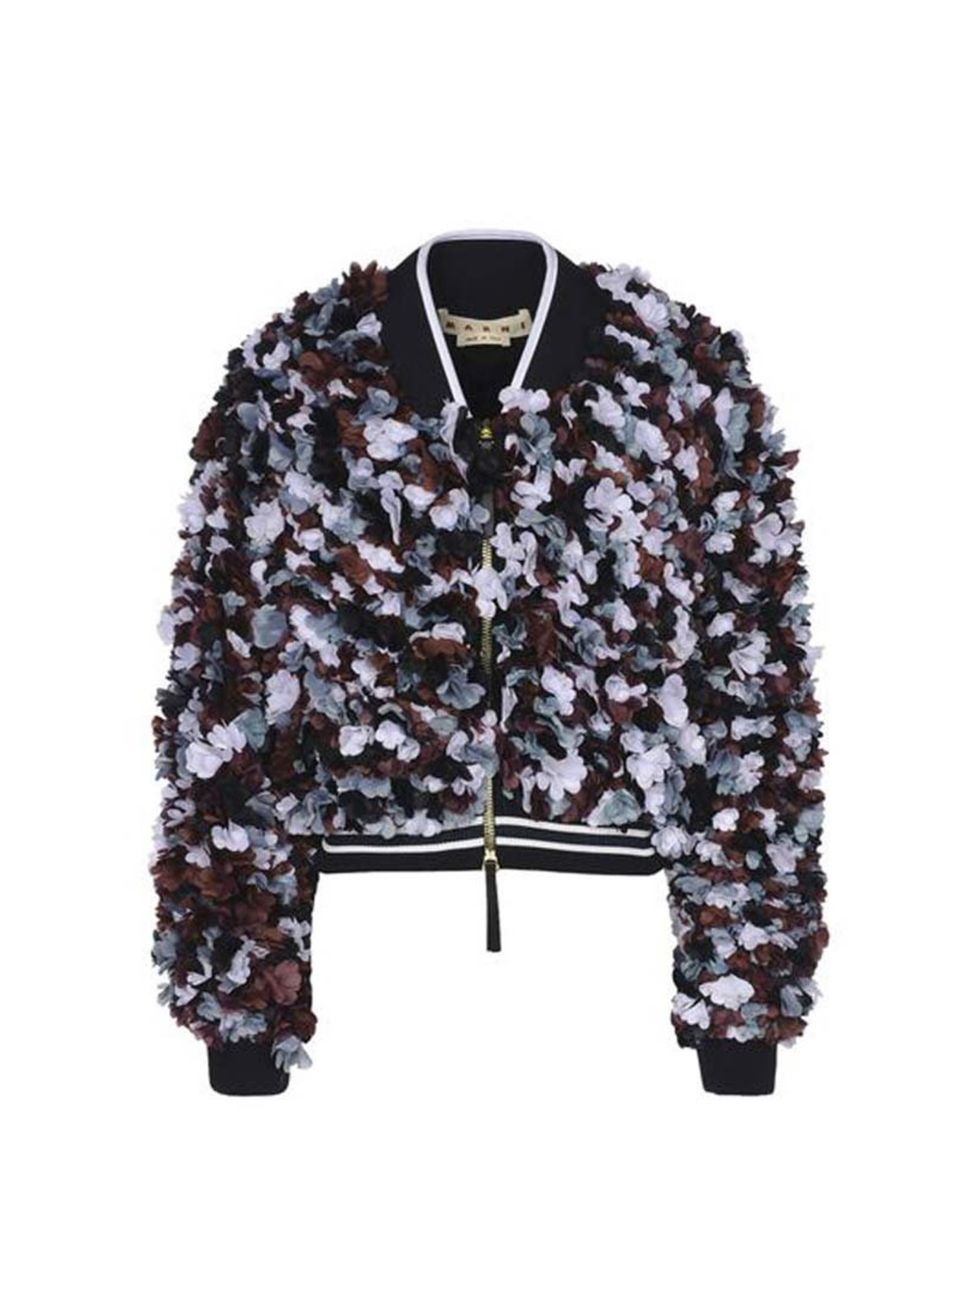 <p>This marvellous Marni jacket is the kind of brilliant statement buy that you'll still be getting compliments on in 10 years time. Plus, <a href="http://www.elleuk.com/star-style/celebrity-fashion-trends/lily-allen-cover-shoot-fashion-magazine-miu-miu-p